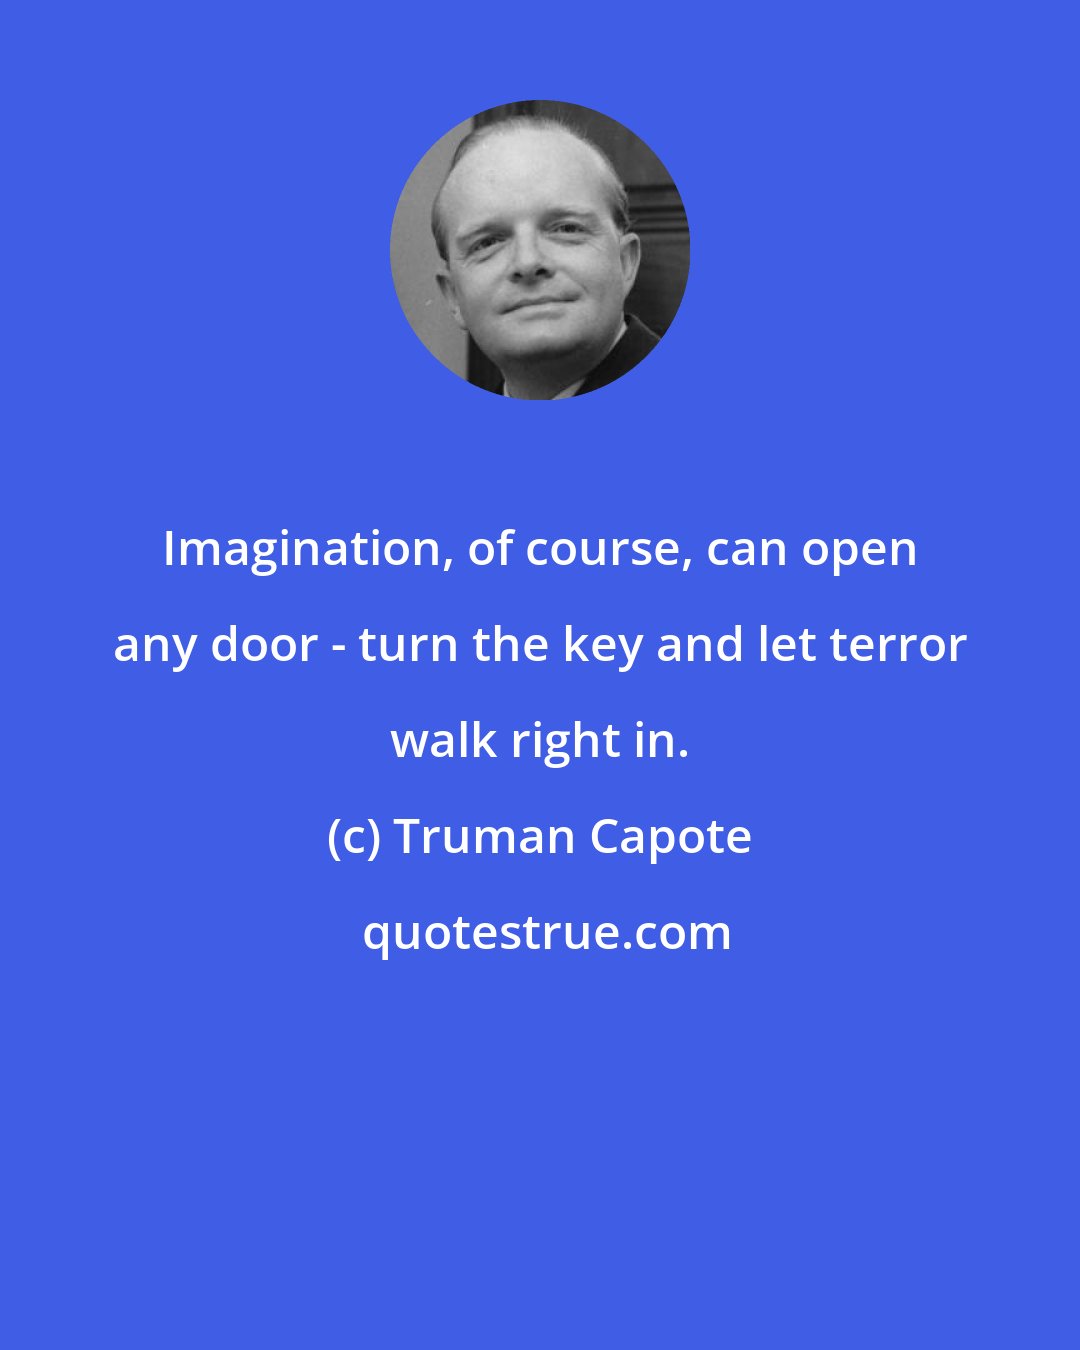 Truman Capote: Imagination, of course, can open any door - turn the key and let terror walk right in.